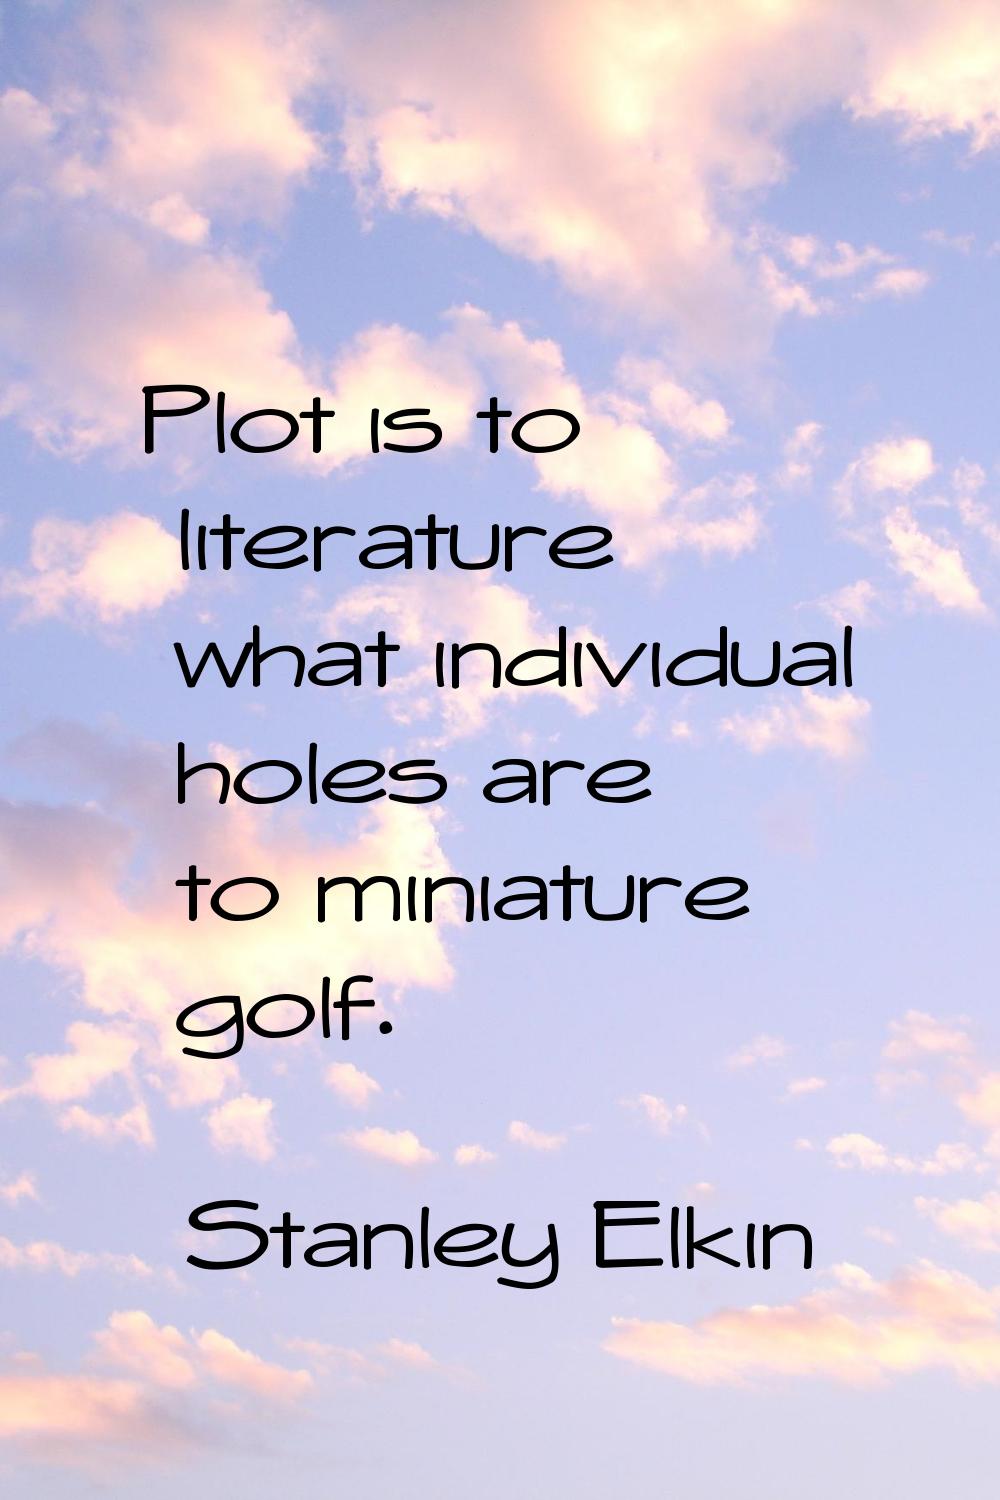 Plot is to literature what individual holes are to miniature golf.